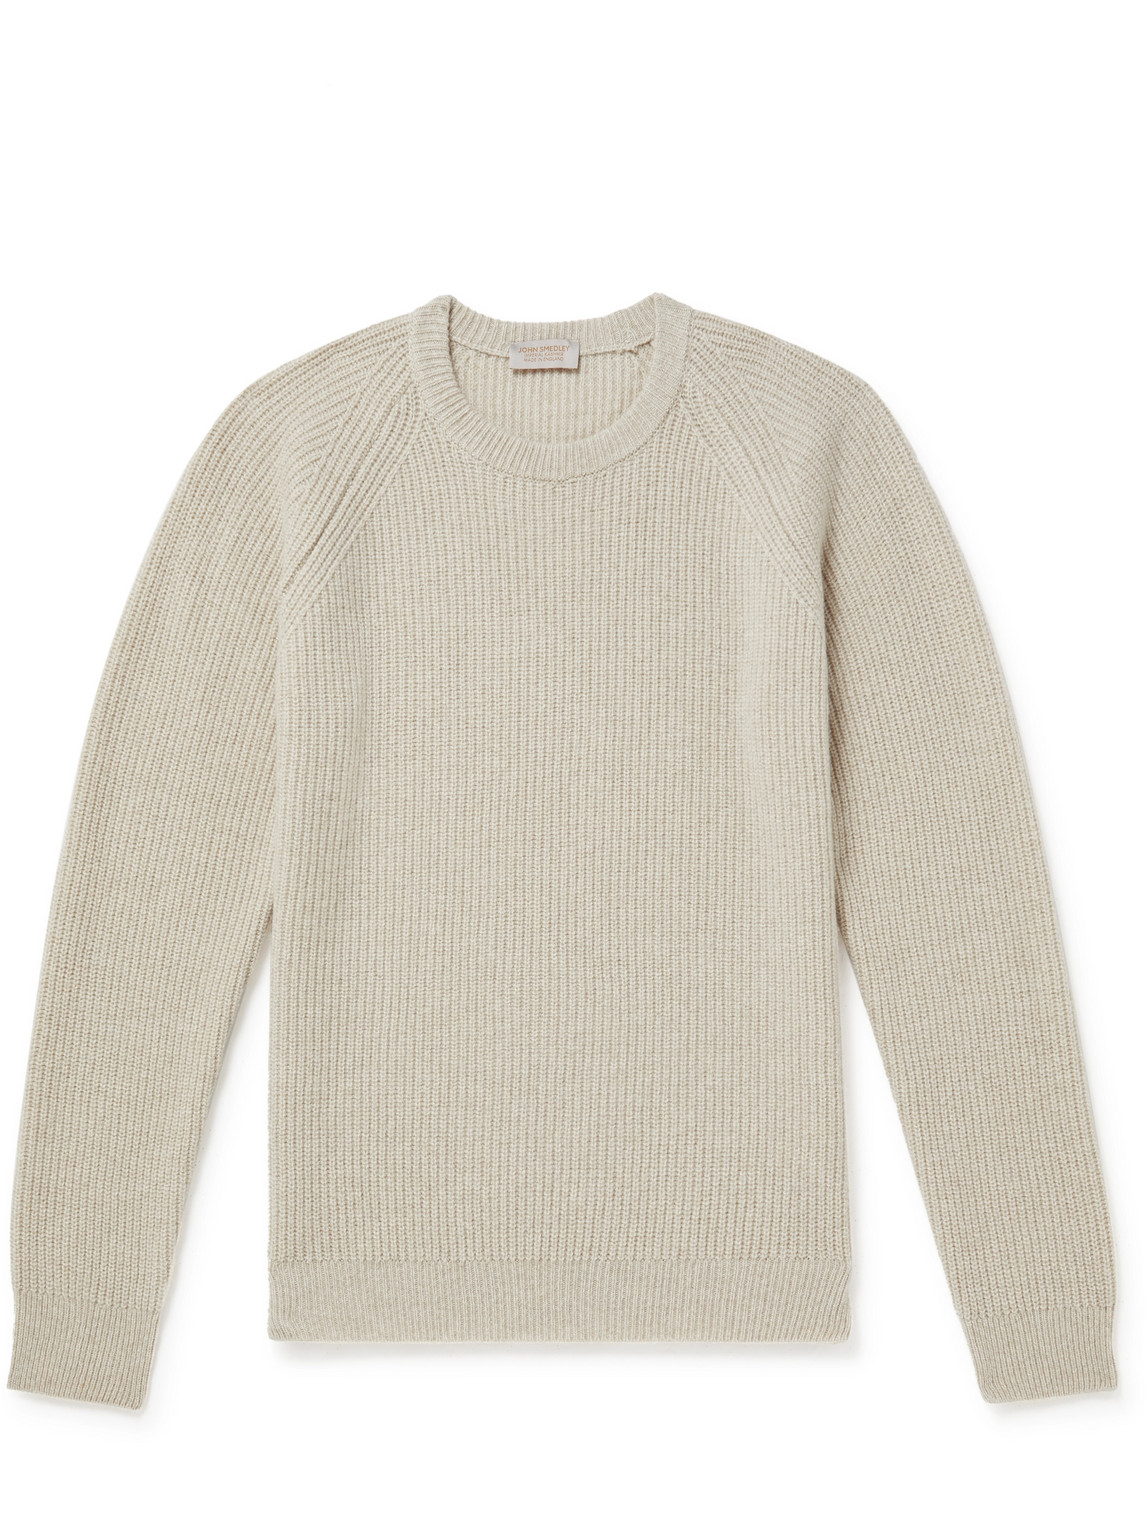 JOHN SMEDLEY UPSON RIBBED RECYCLED CASHMERE AND MERINO WOOL-BLEND SWEATER